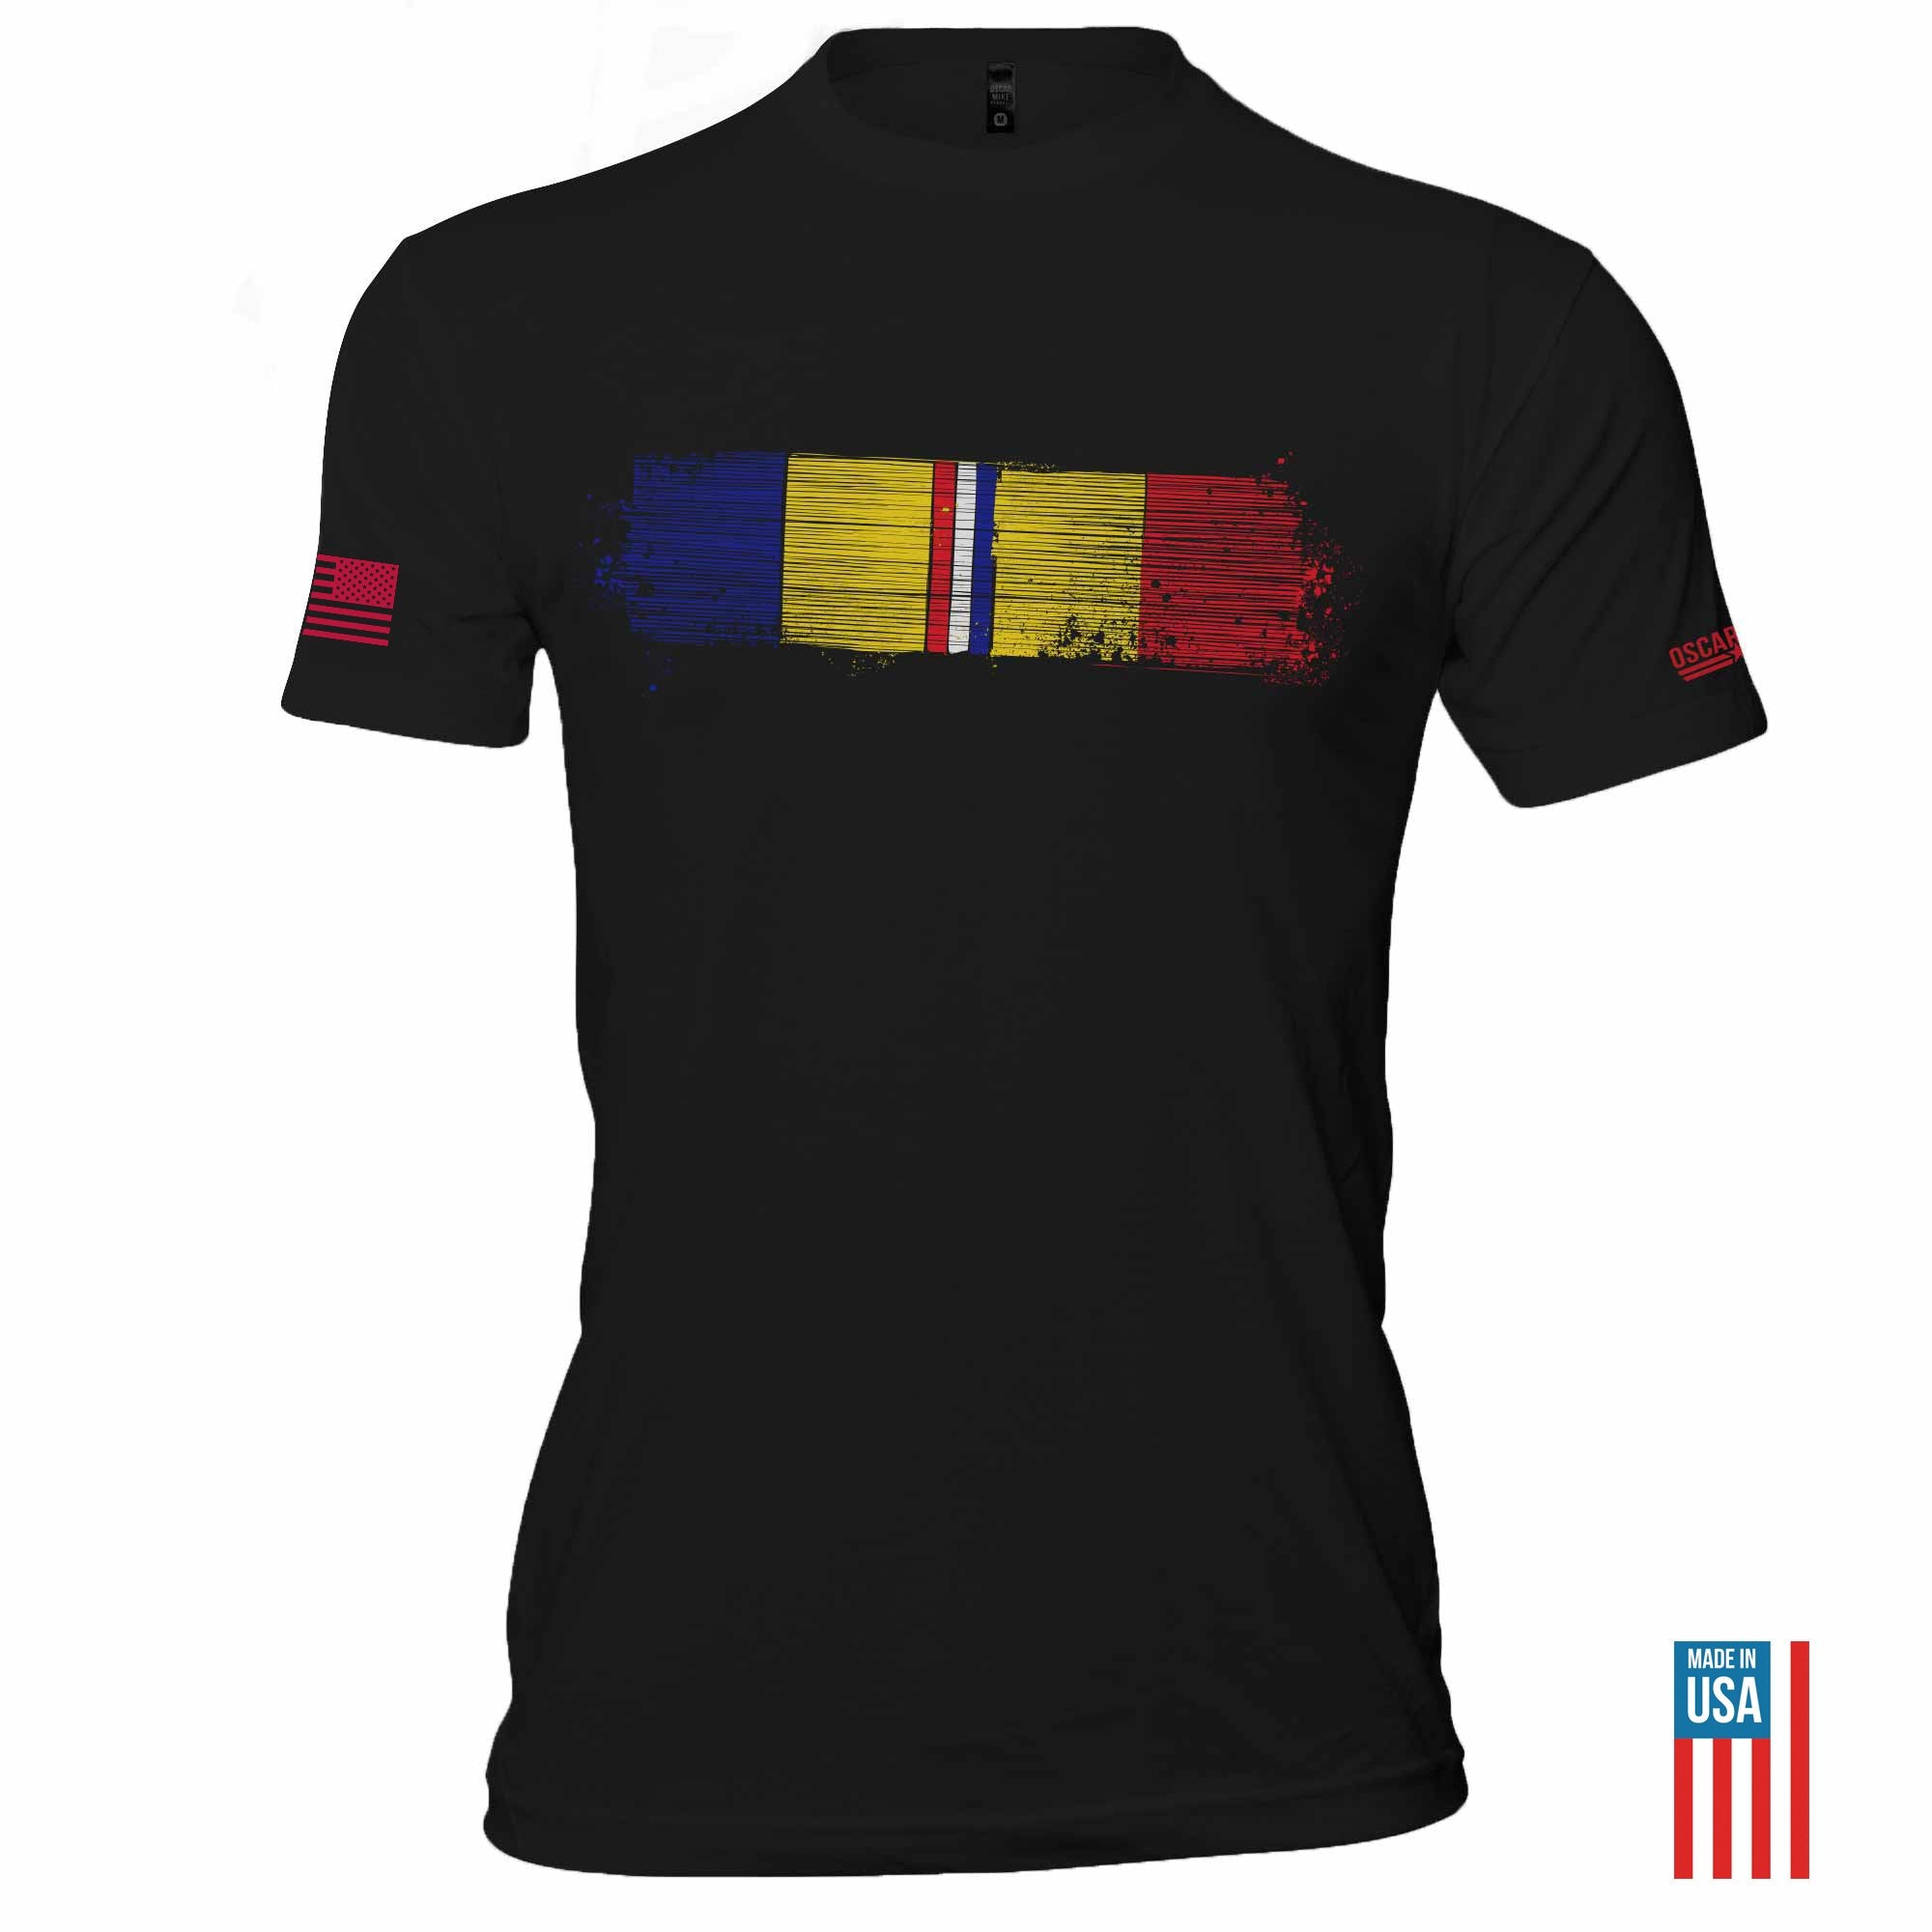 Combat Action Ribbon Tee T-Shirt from Oscar Mike Apparel